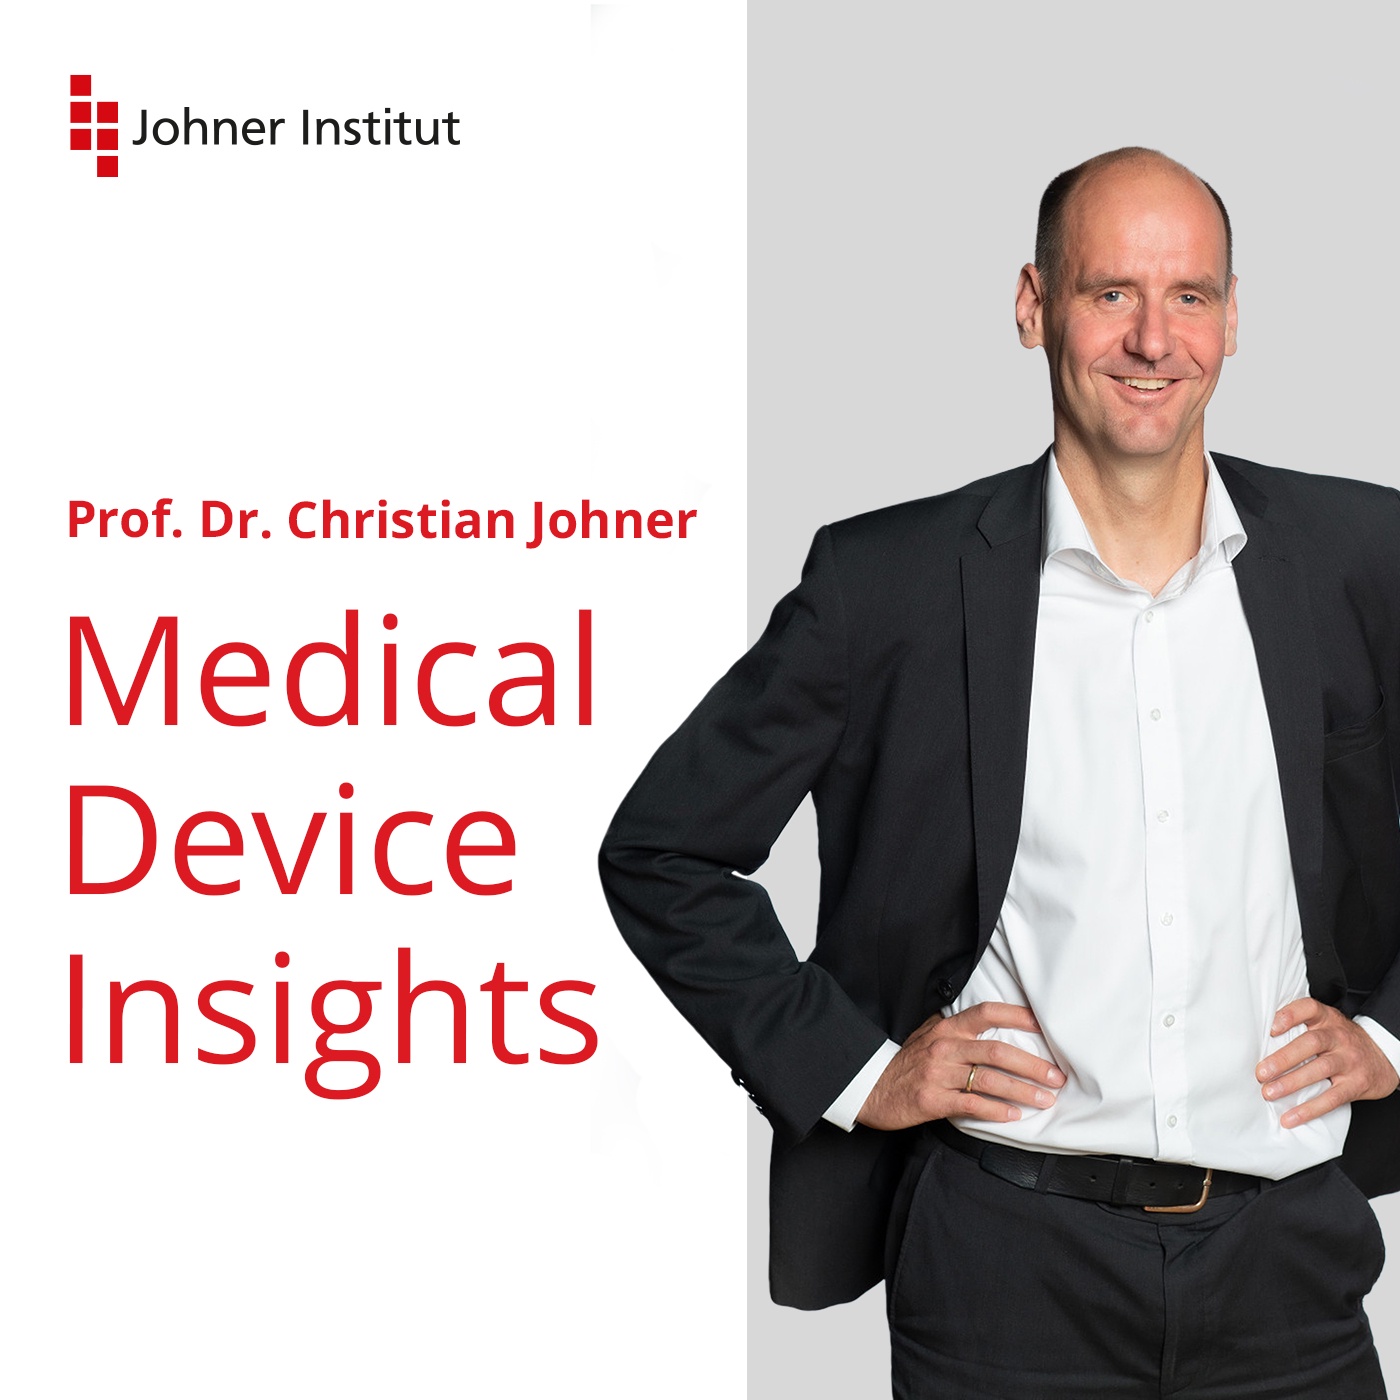 Medical Device Insights